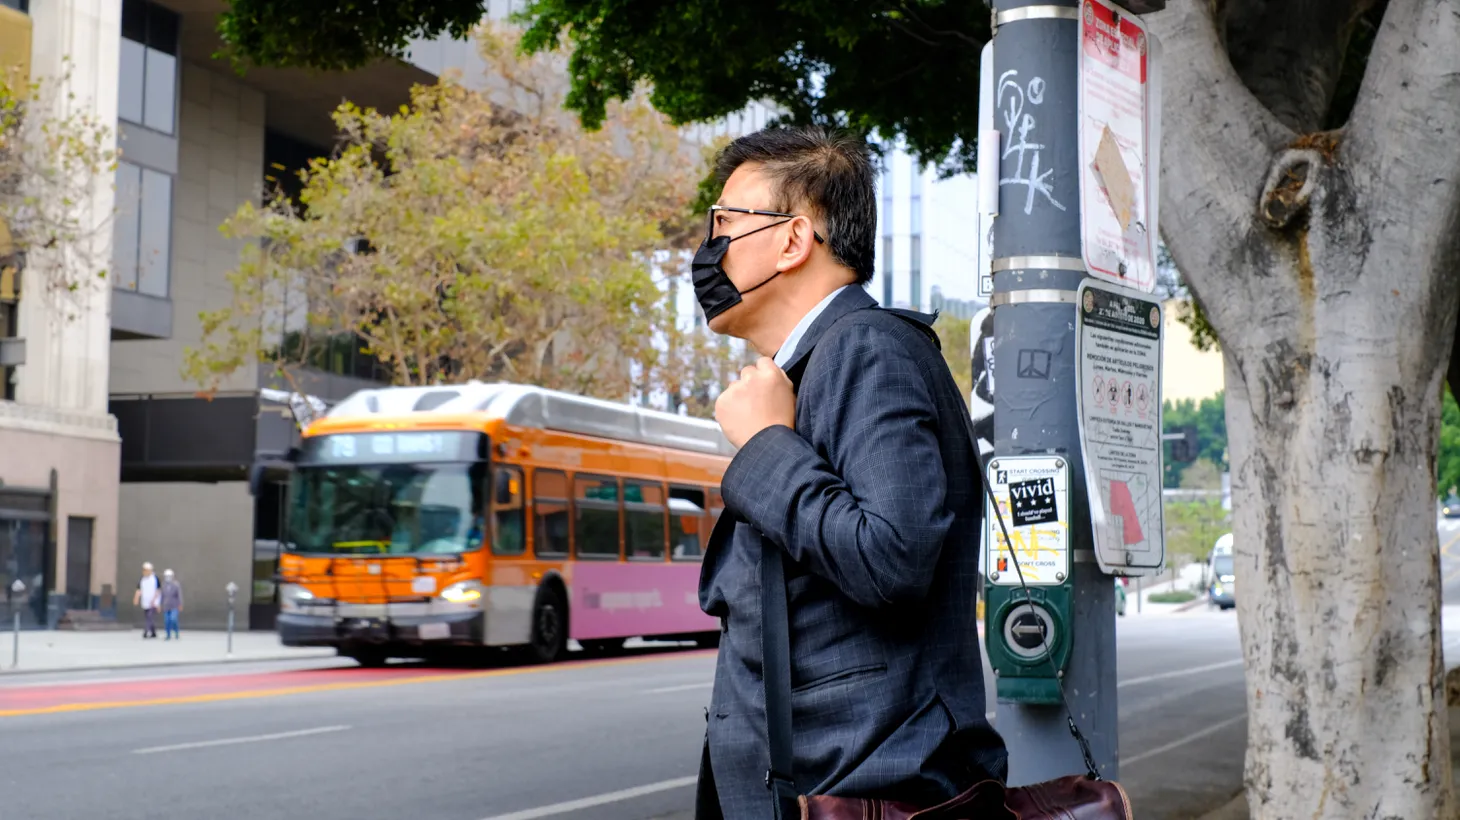 A man wears a face mask while waiting at an intersection near LA City Hall, October 14, 2022. Two new Omicron variants have appeared: BQ.1 and BQ1.1.